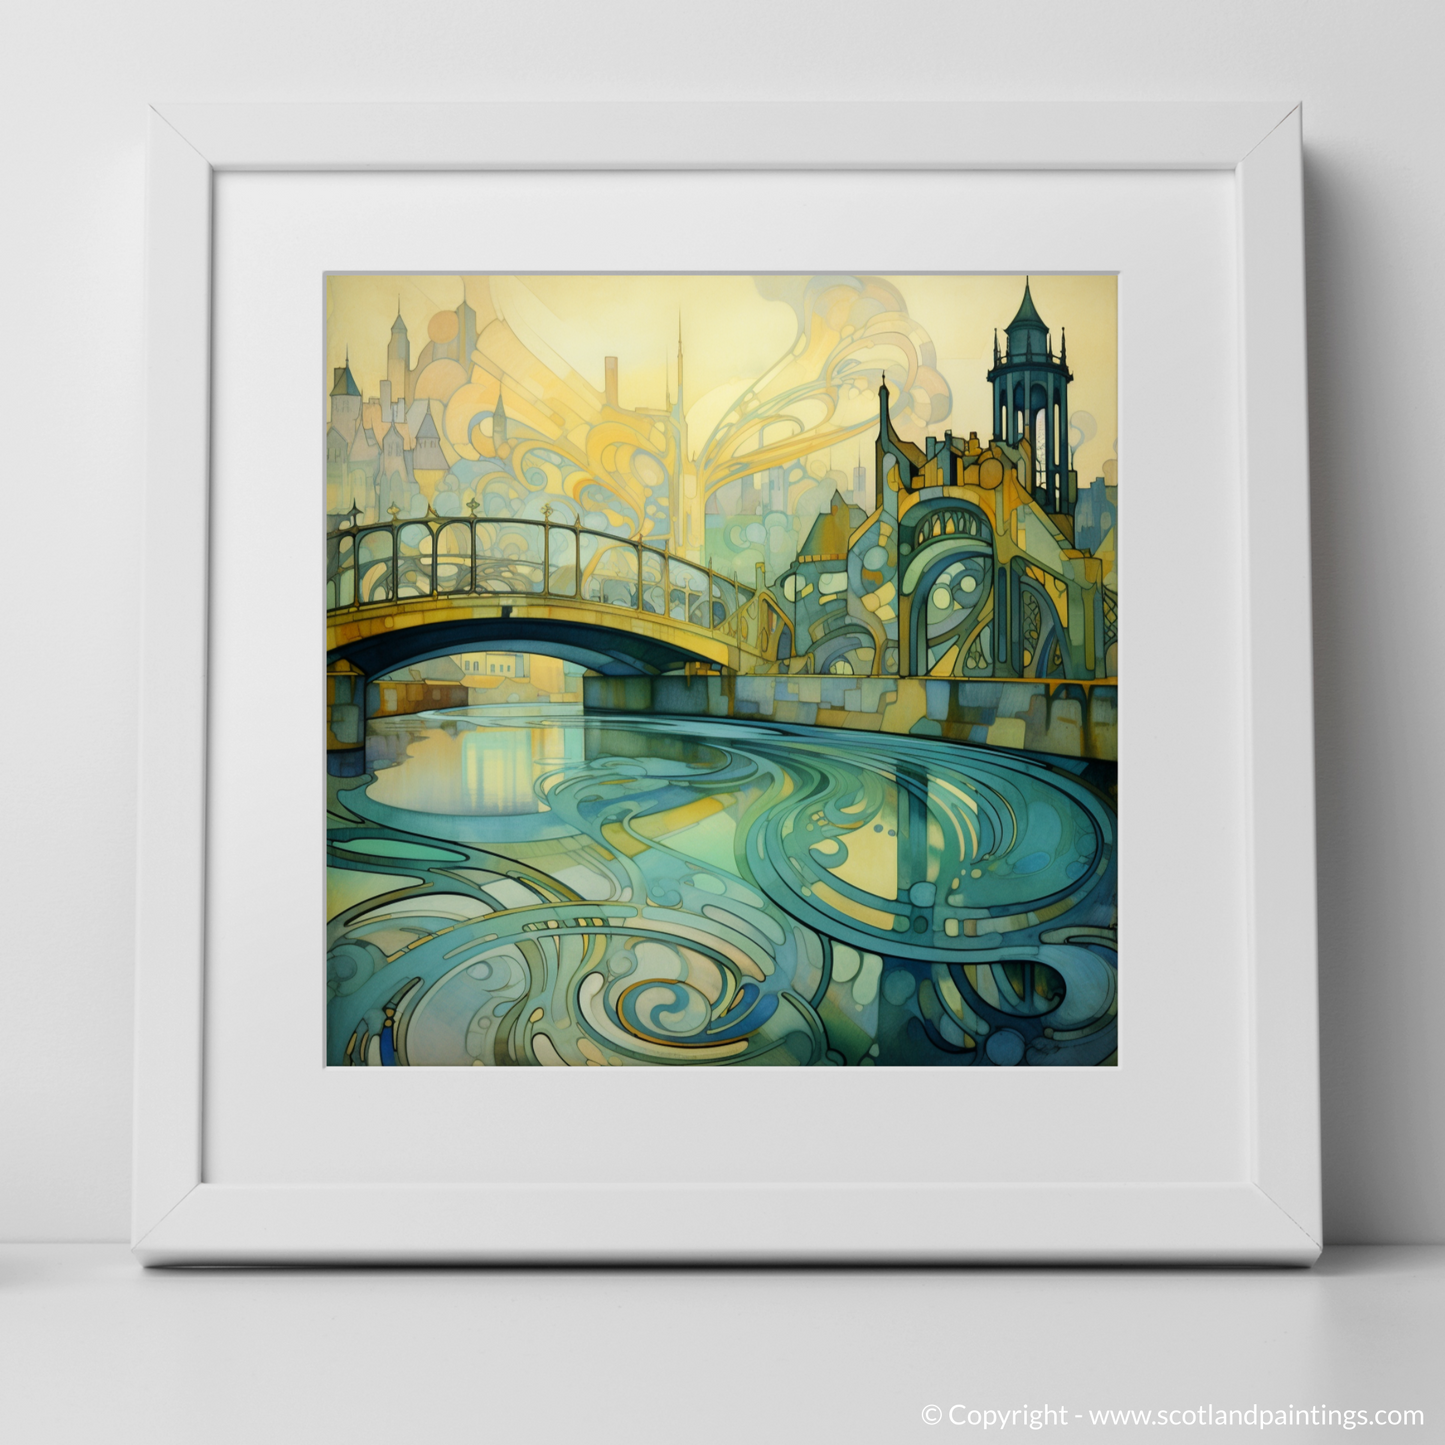 Clyde's Elegance: An Art Nouveau Tribute to Glasgow's Serene Waters